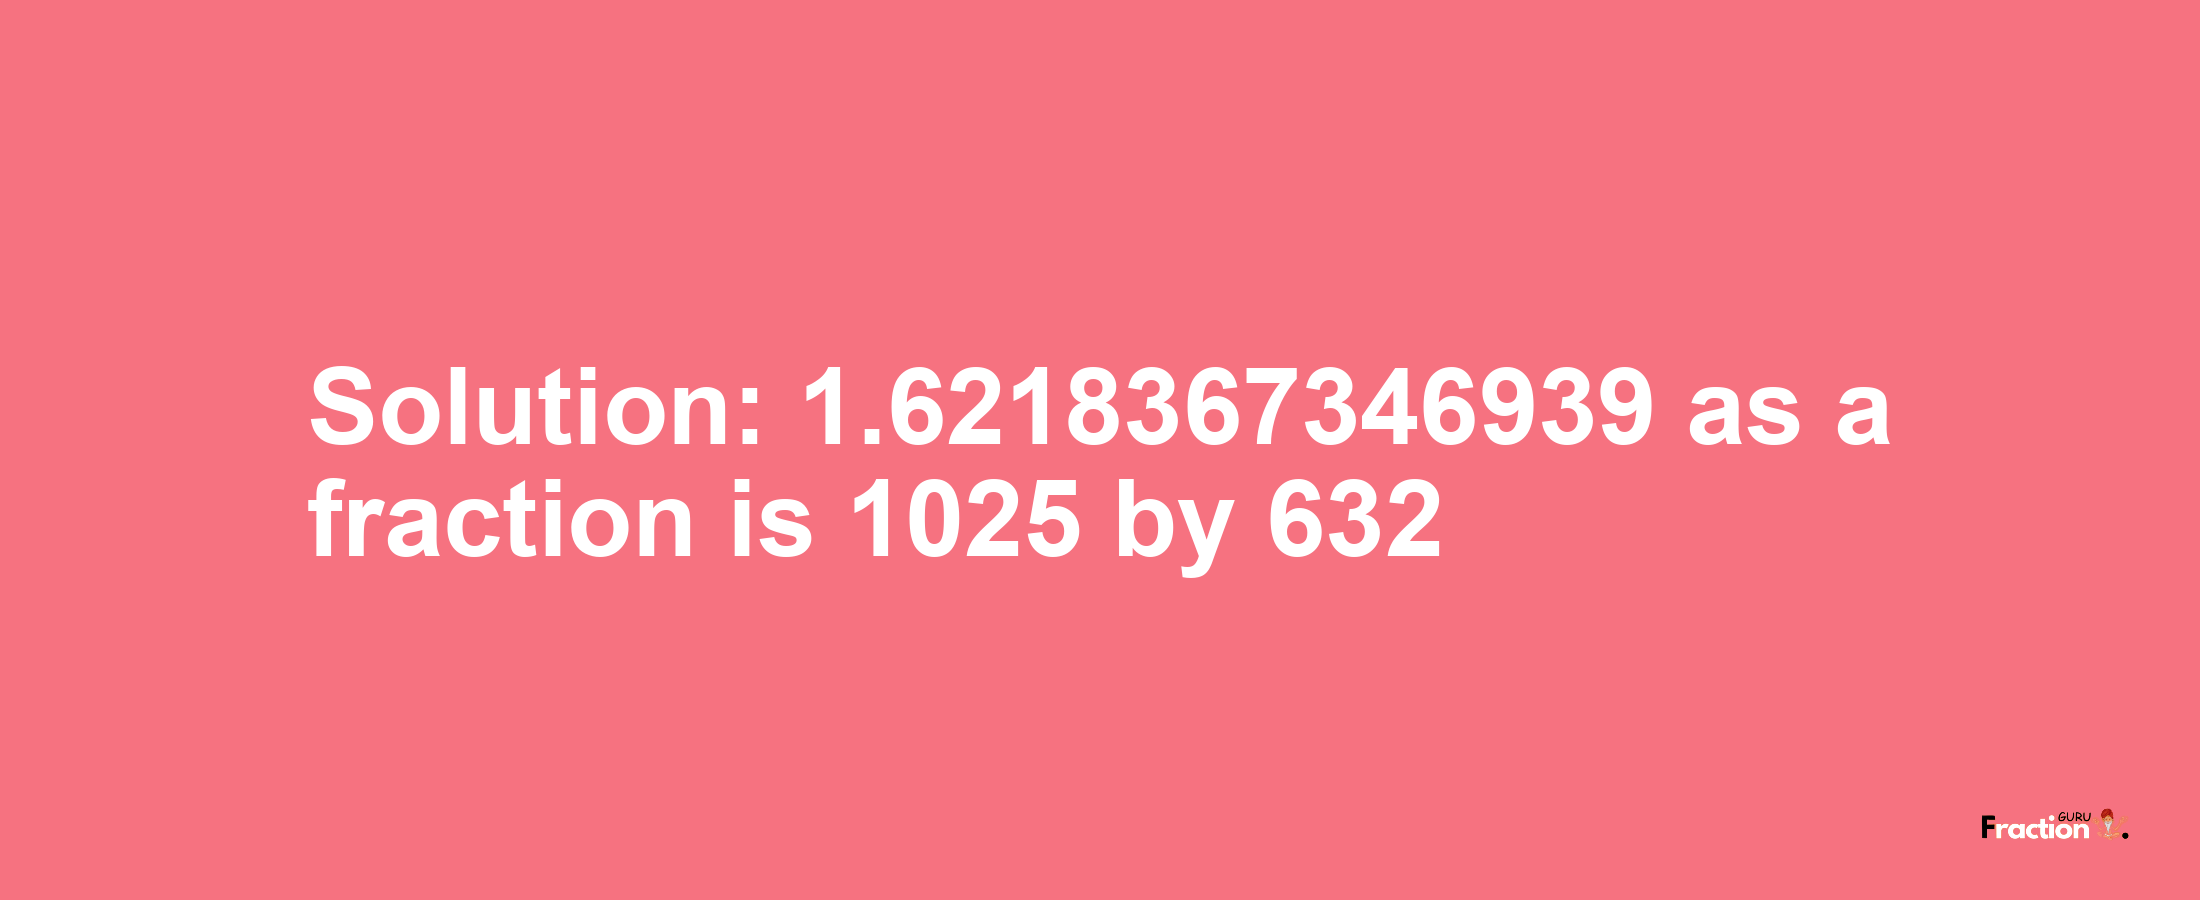 Solution:1.6218367346939 as a fraction is 1025/632